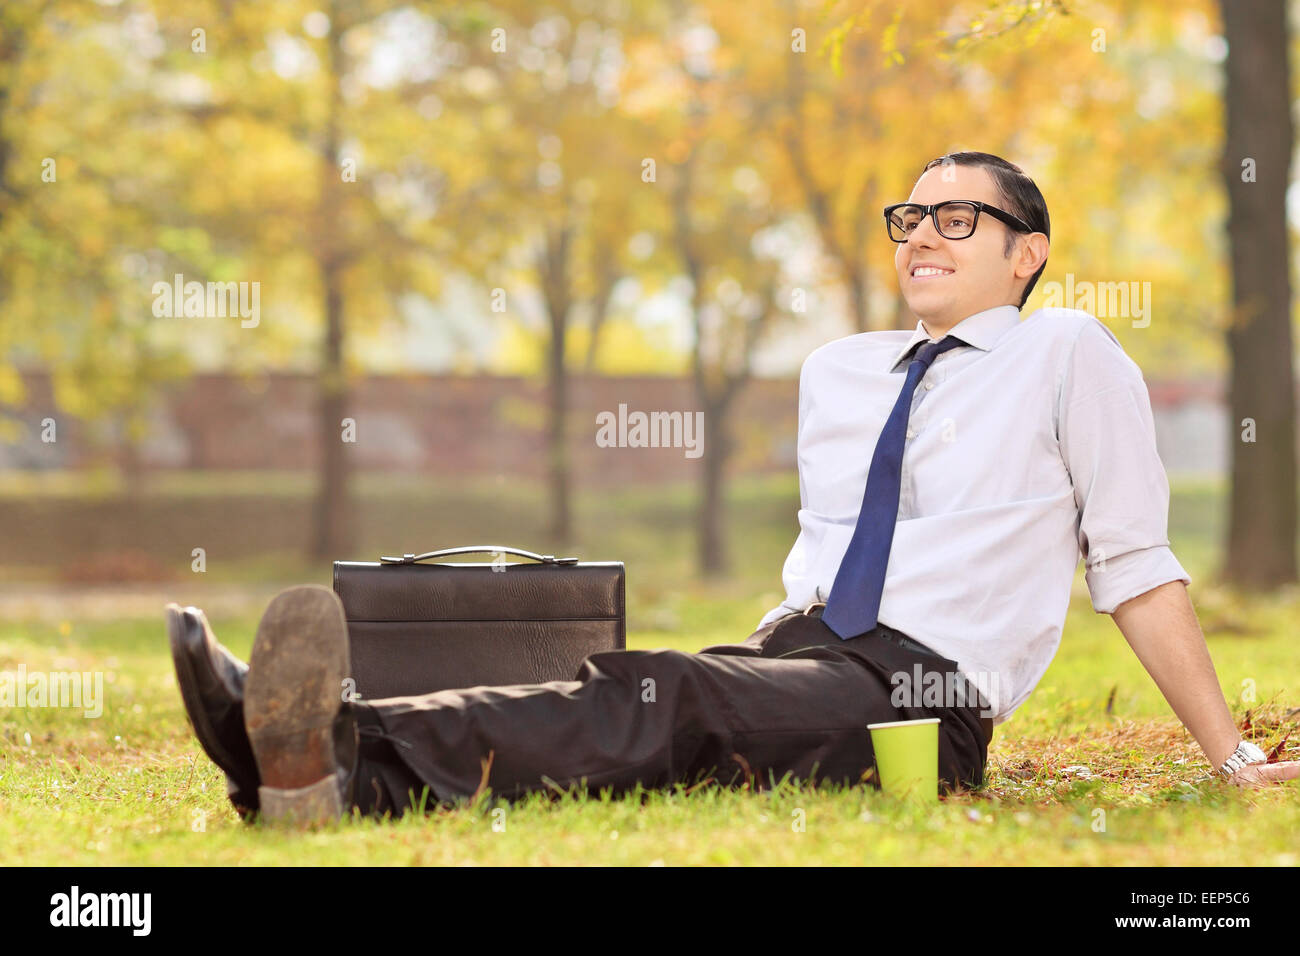 Businessman relaxing seated on the grass in park Stock Photo